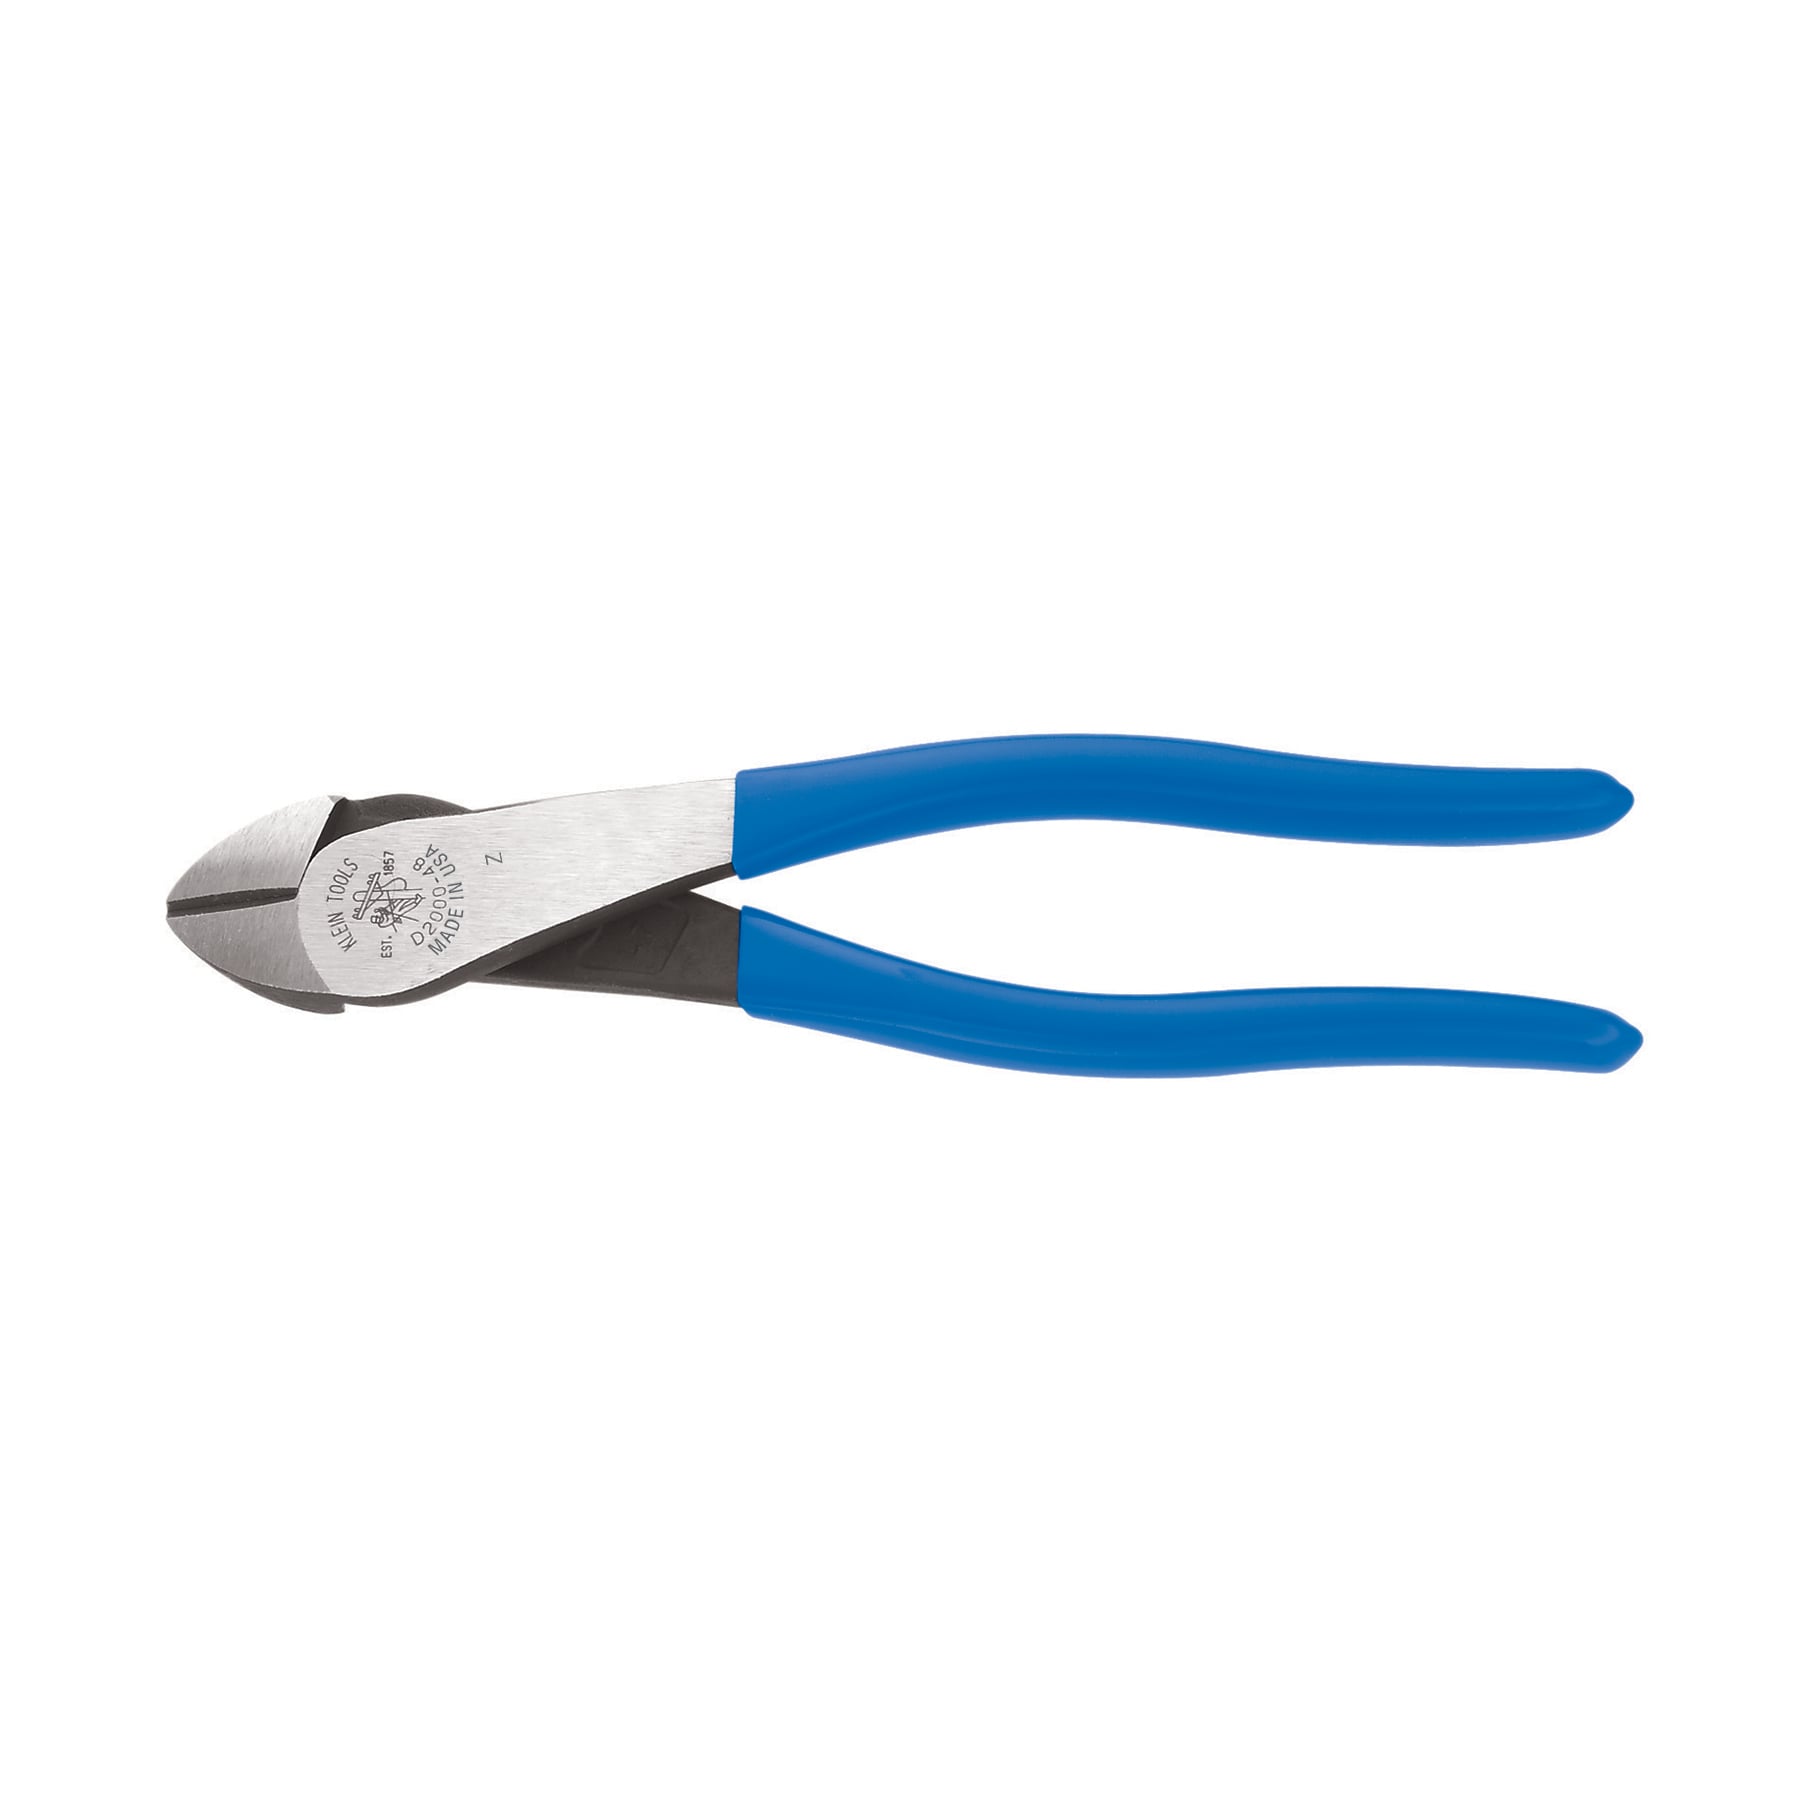 CRAFTSMAN CMHT81645 8-in. Long Nose Pliers 